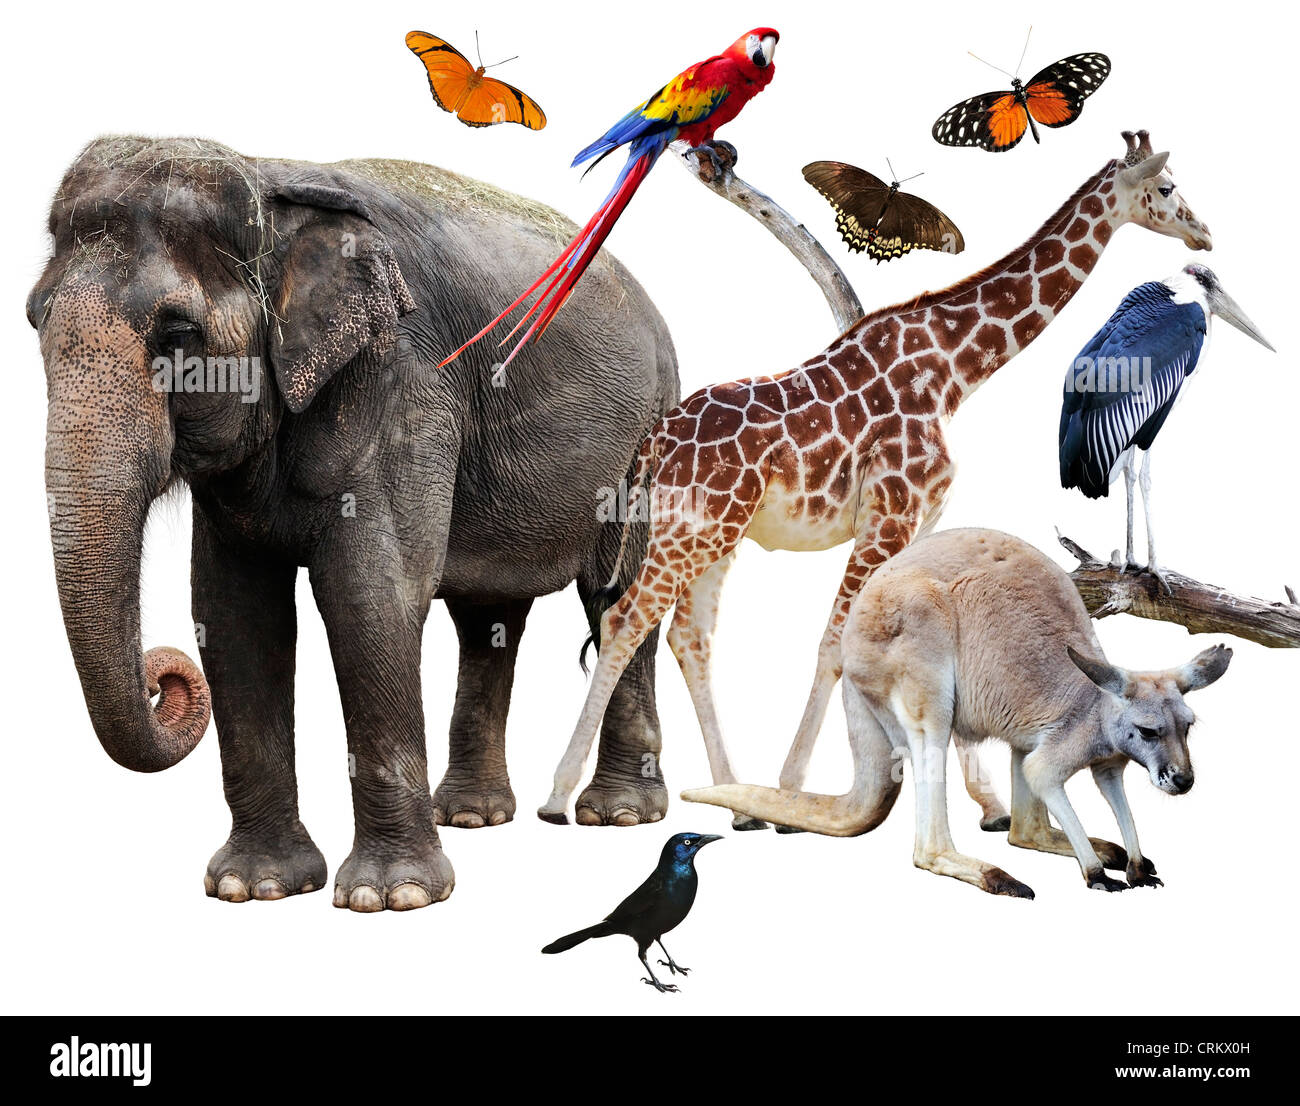 Collage Of Animals Images On White Background Stock Photo